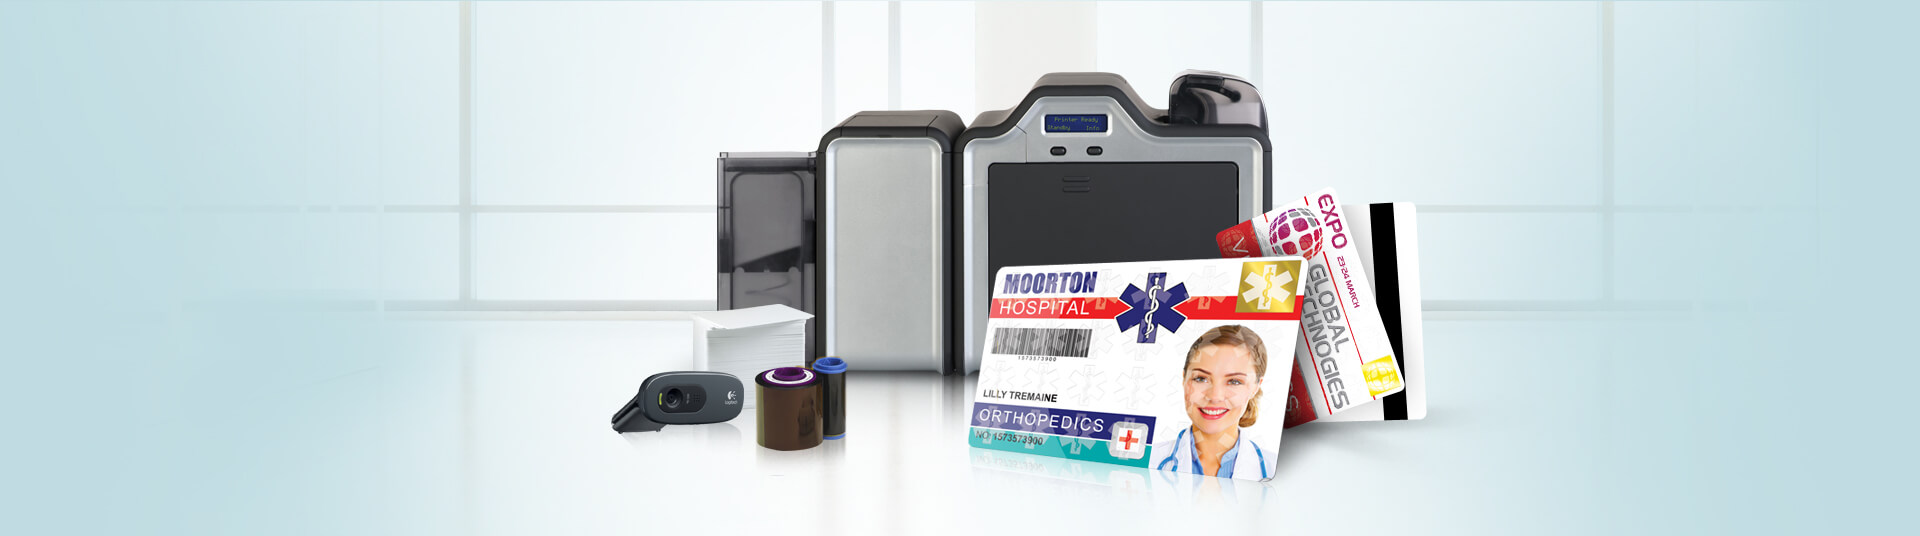 ID Card Printer Security Features